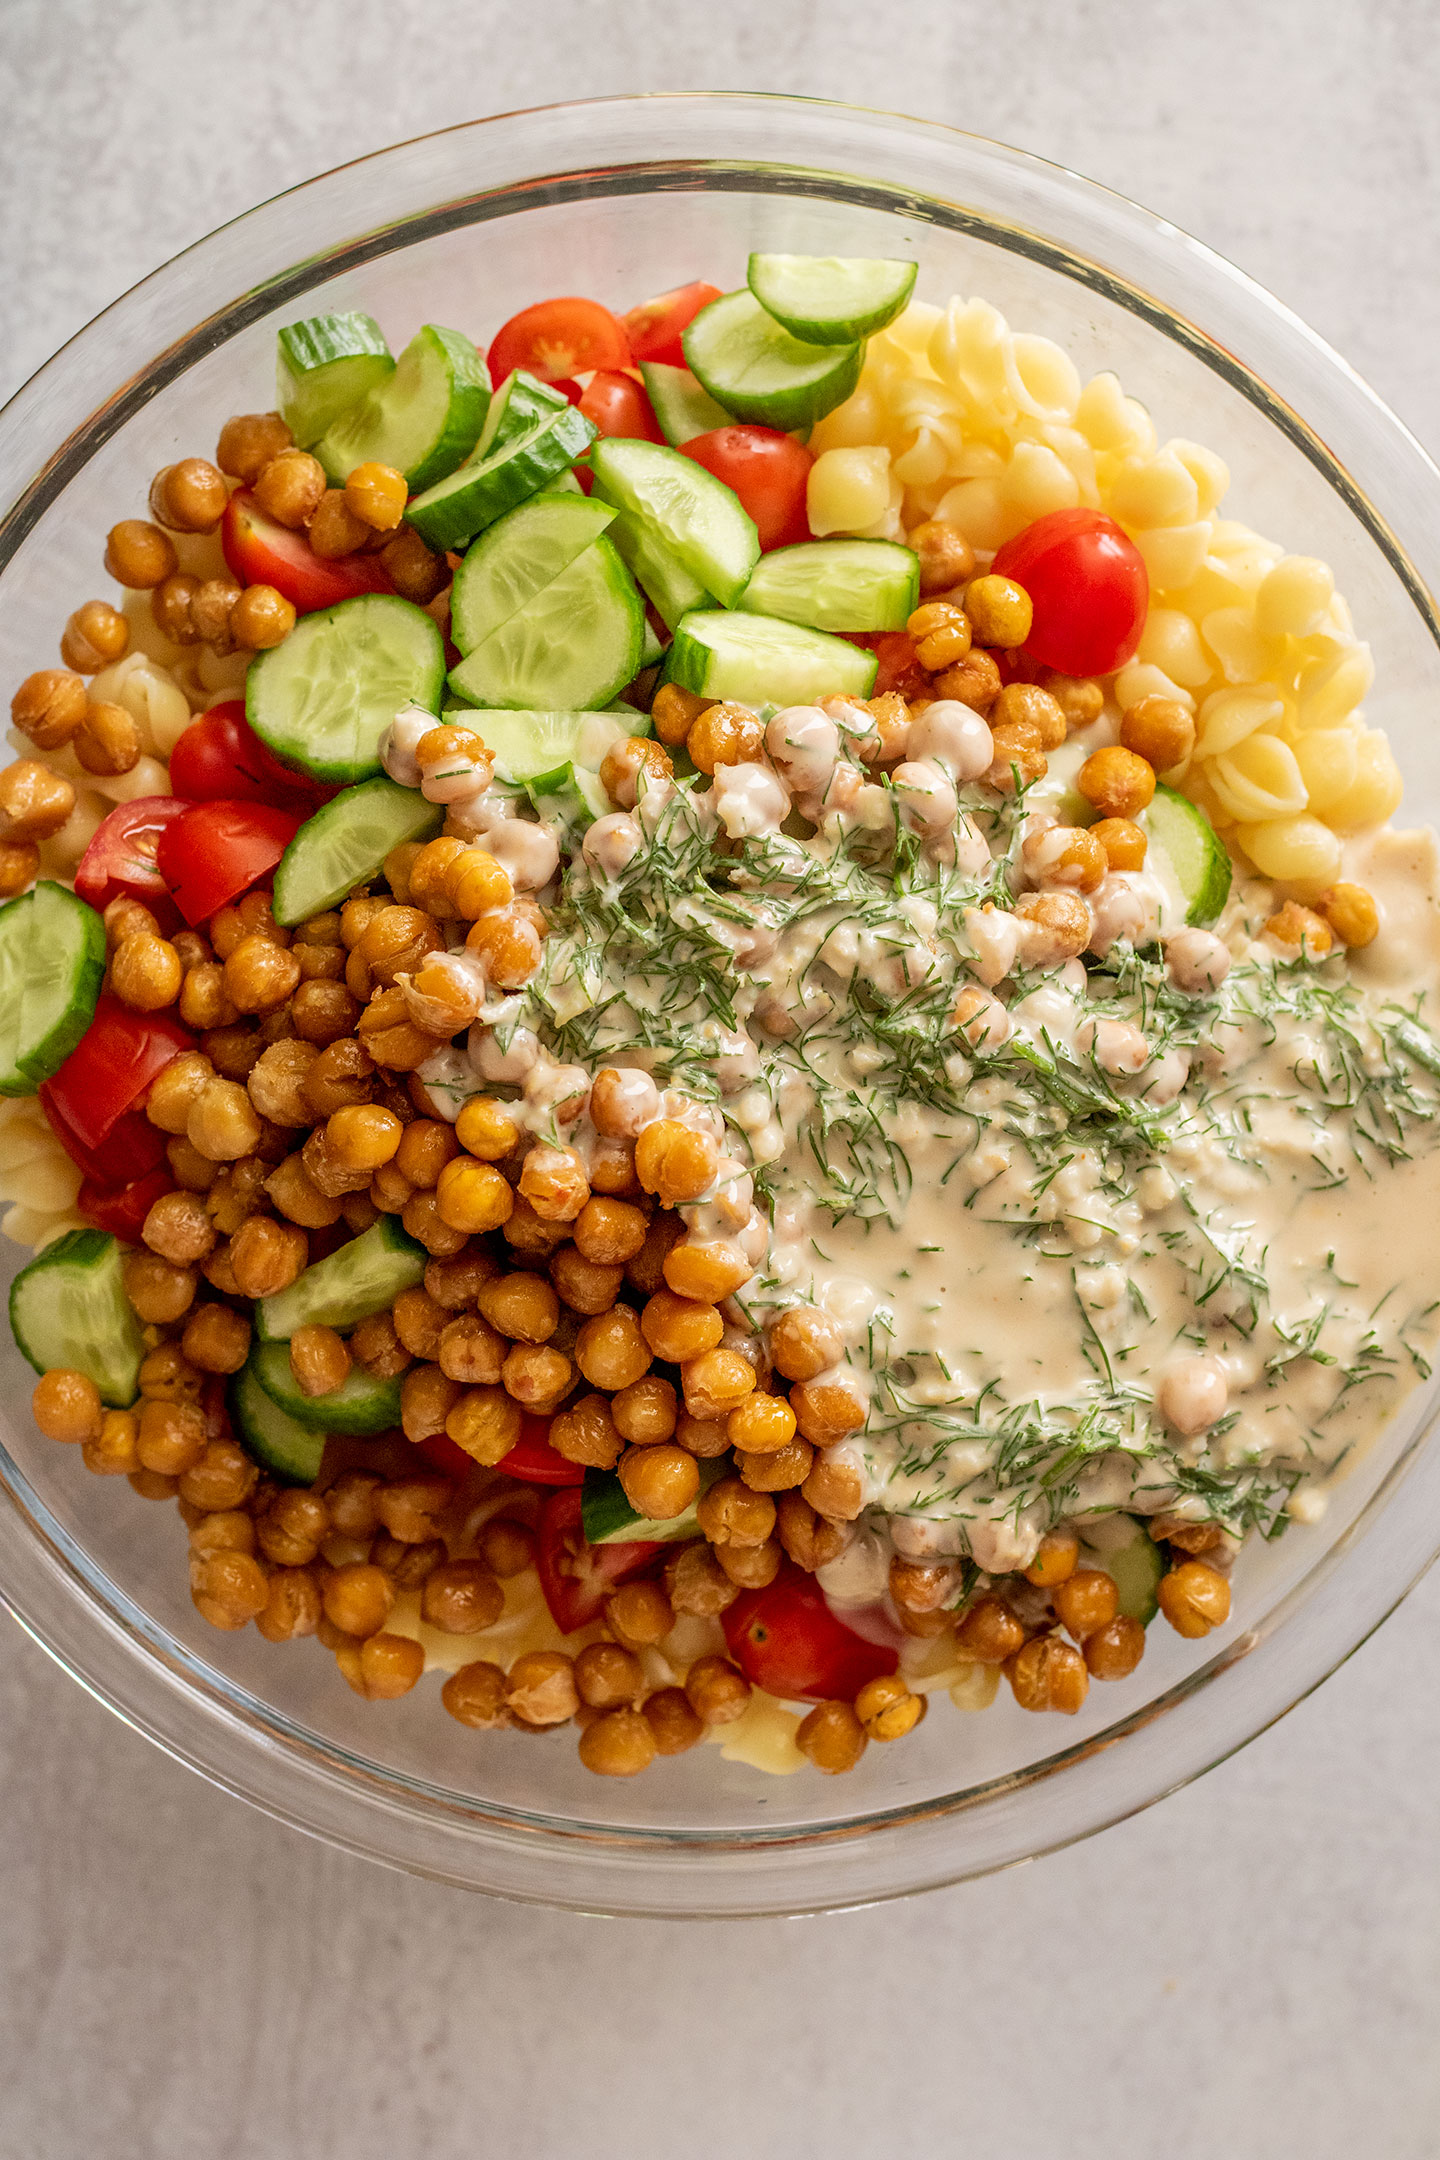 Combining the pasta, tomatoes, cucumbers and roasted chickpeas with the creamy dressing in a bowl.